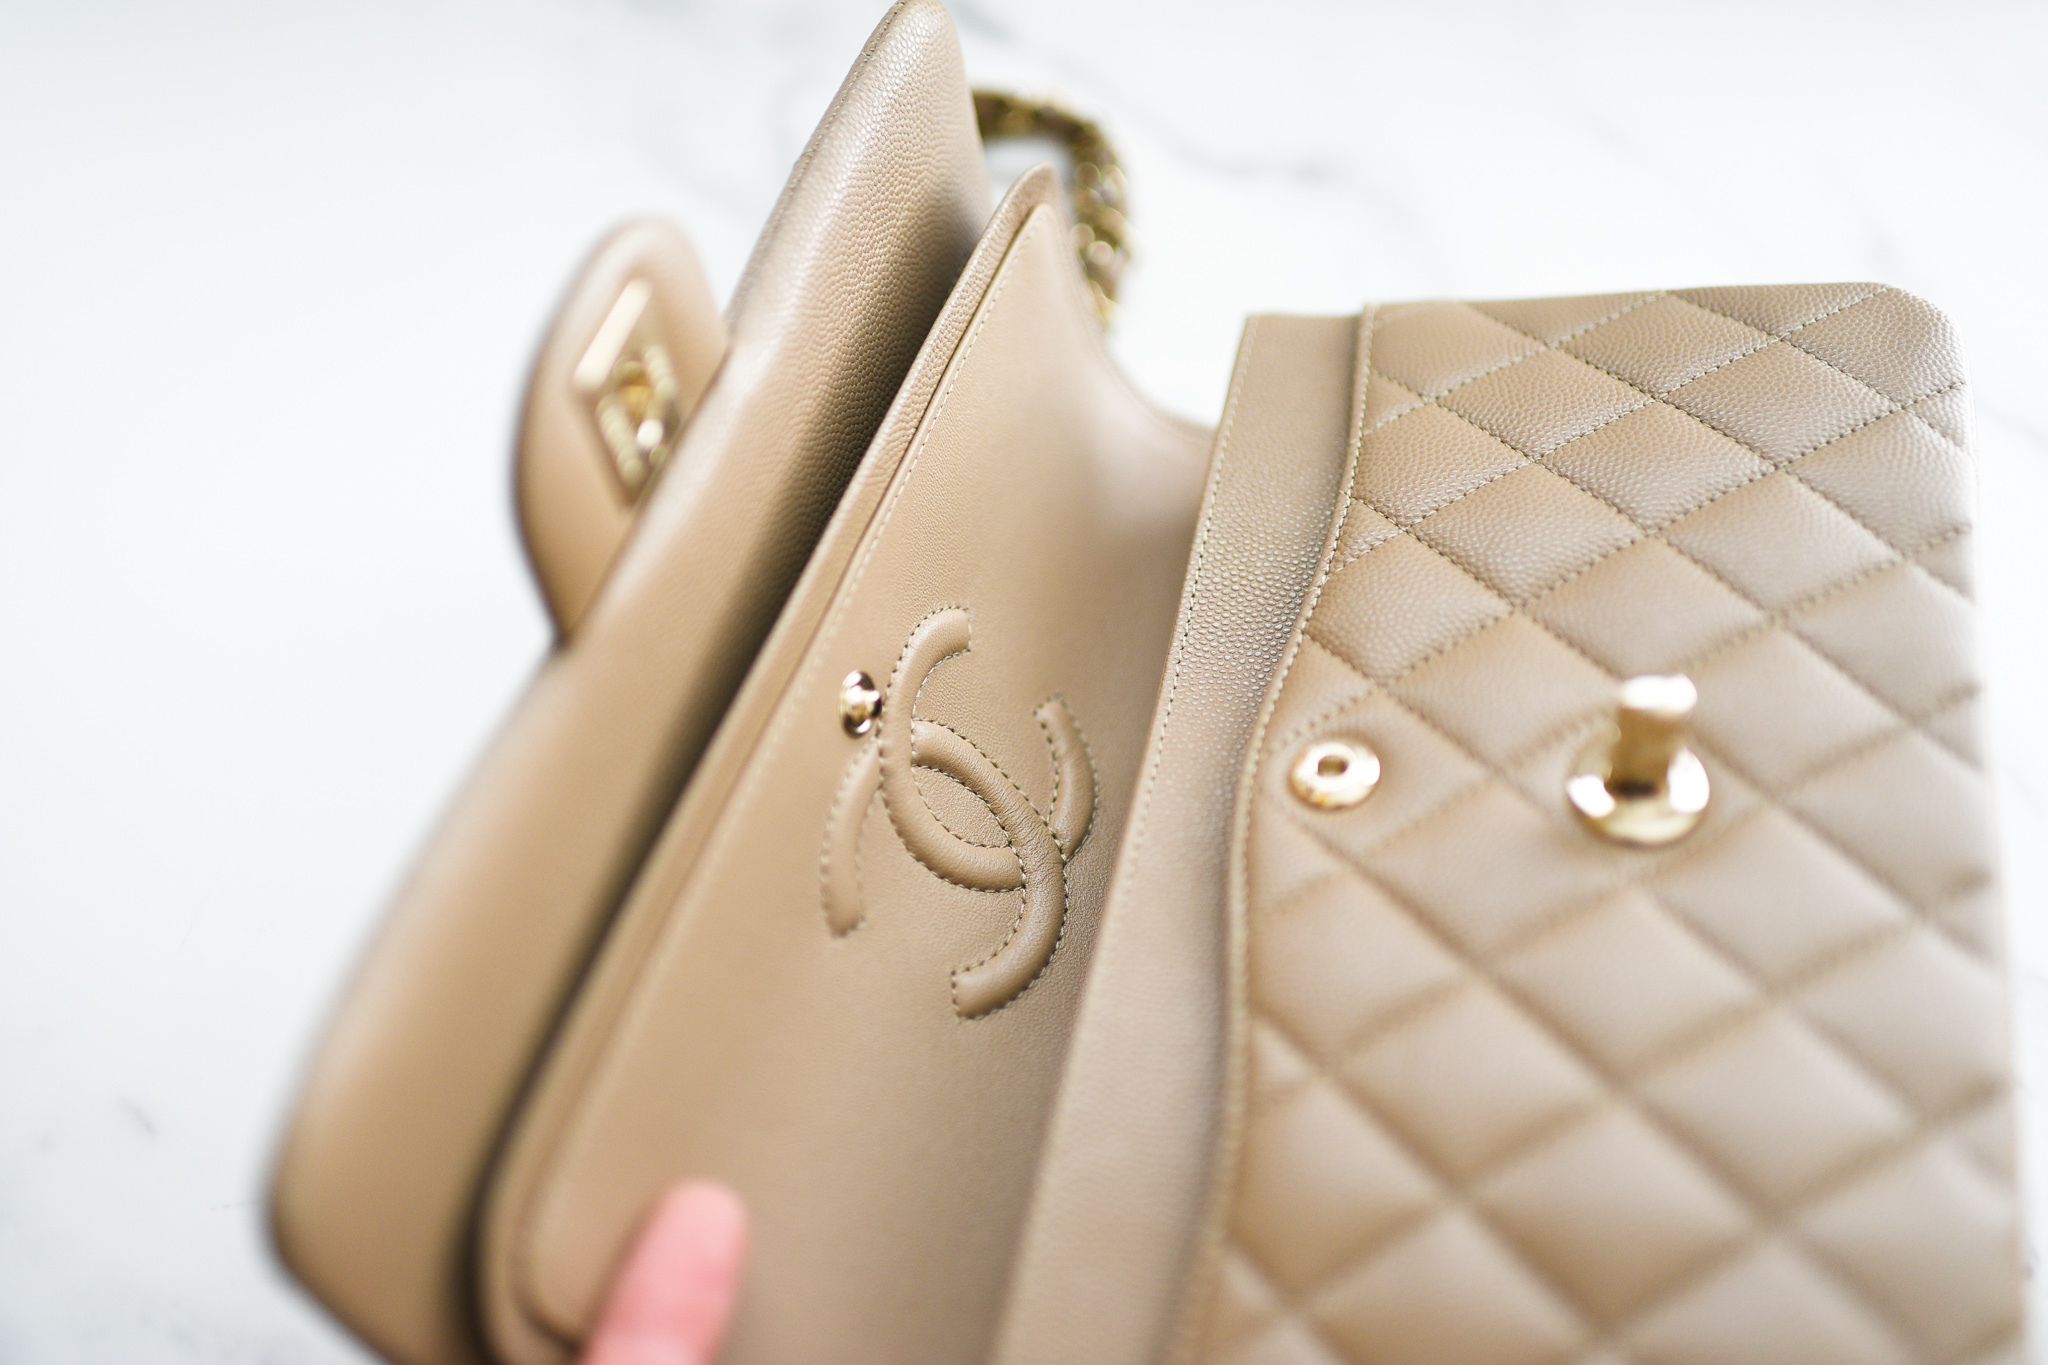 Chanel Classic Small Double Flap, 22A Dark Beige Caviar Leather with Gold  Hardware, New in Box GA001